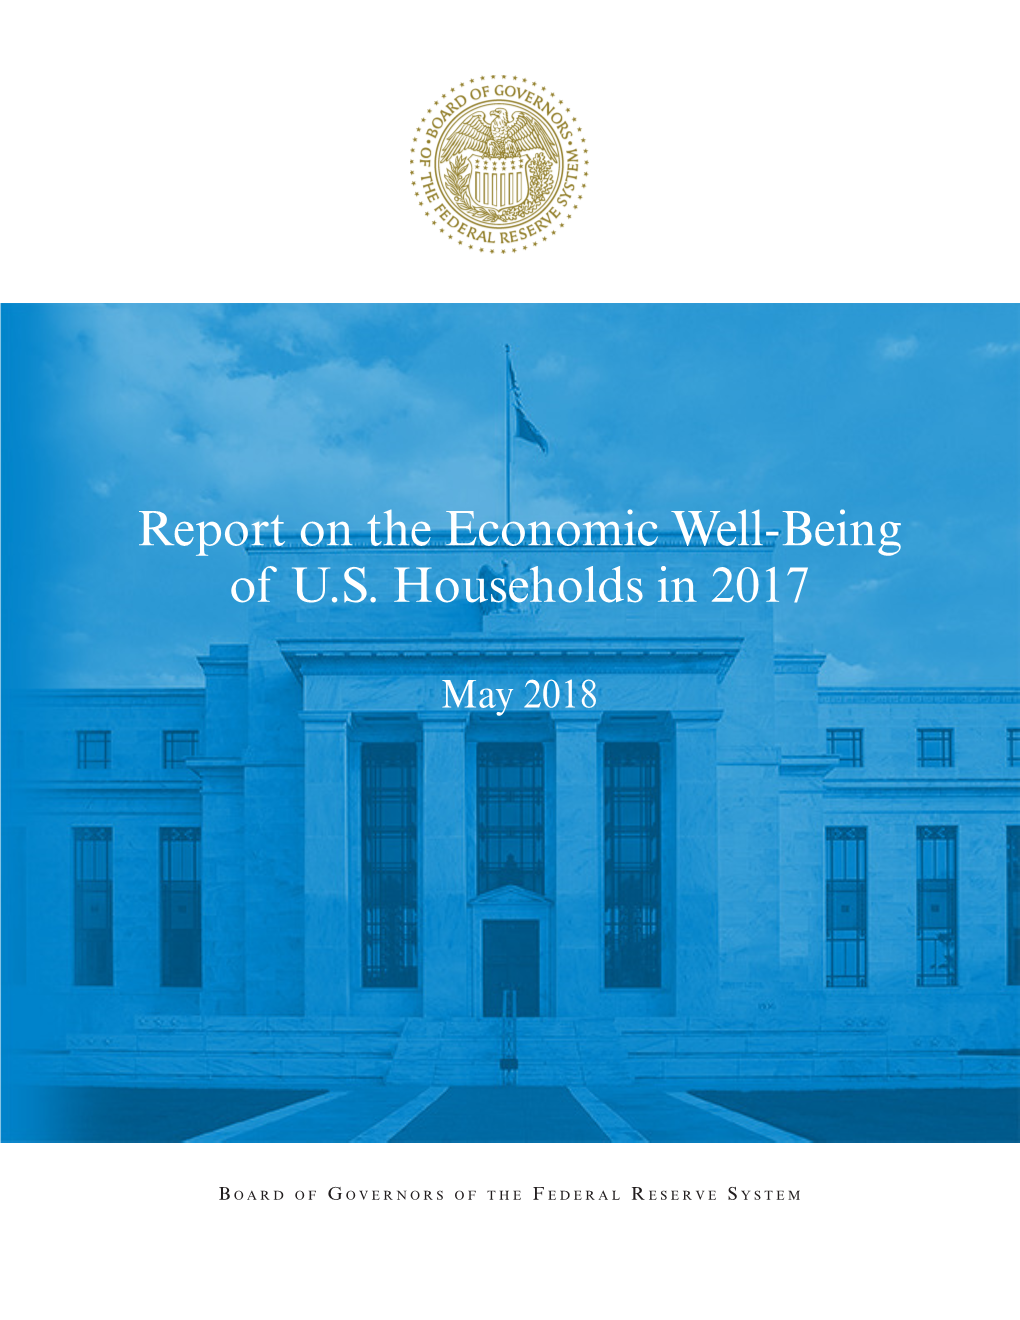 Report on the Economic Well-Being of U.S. Households in 2017, May 2018